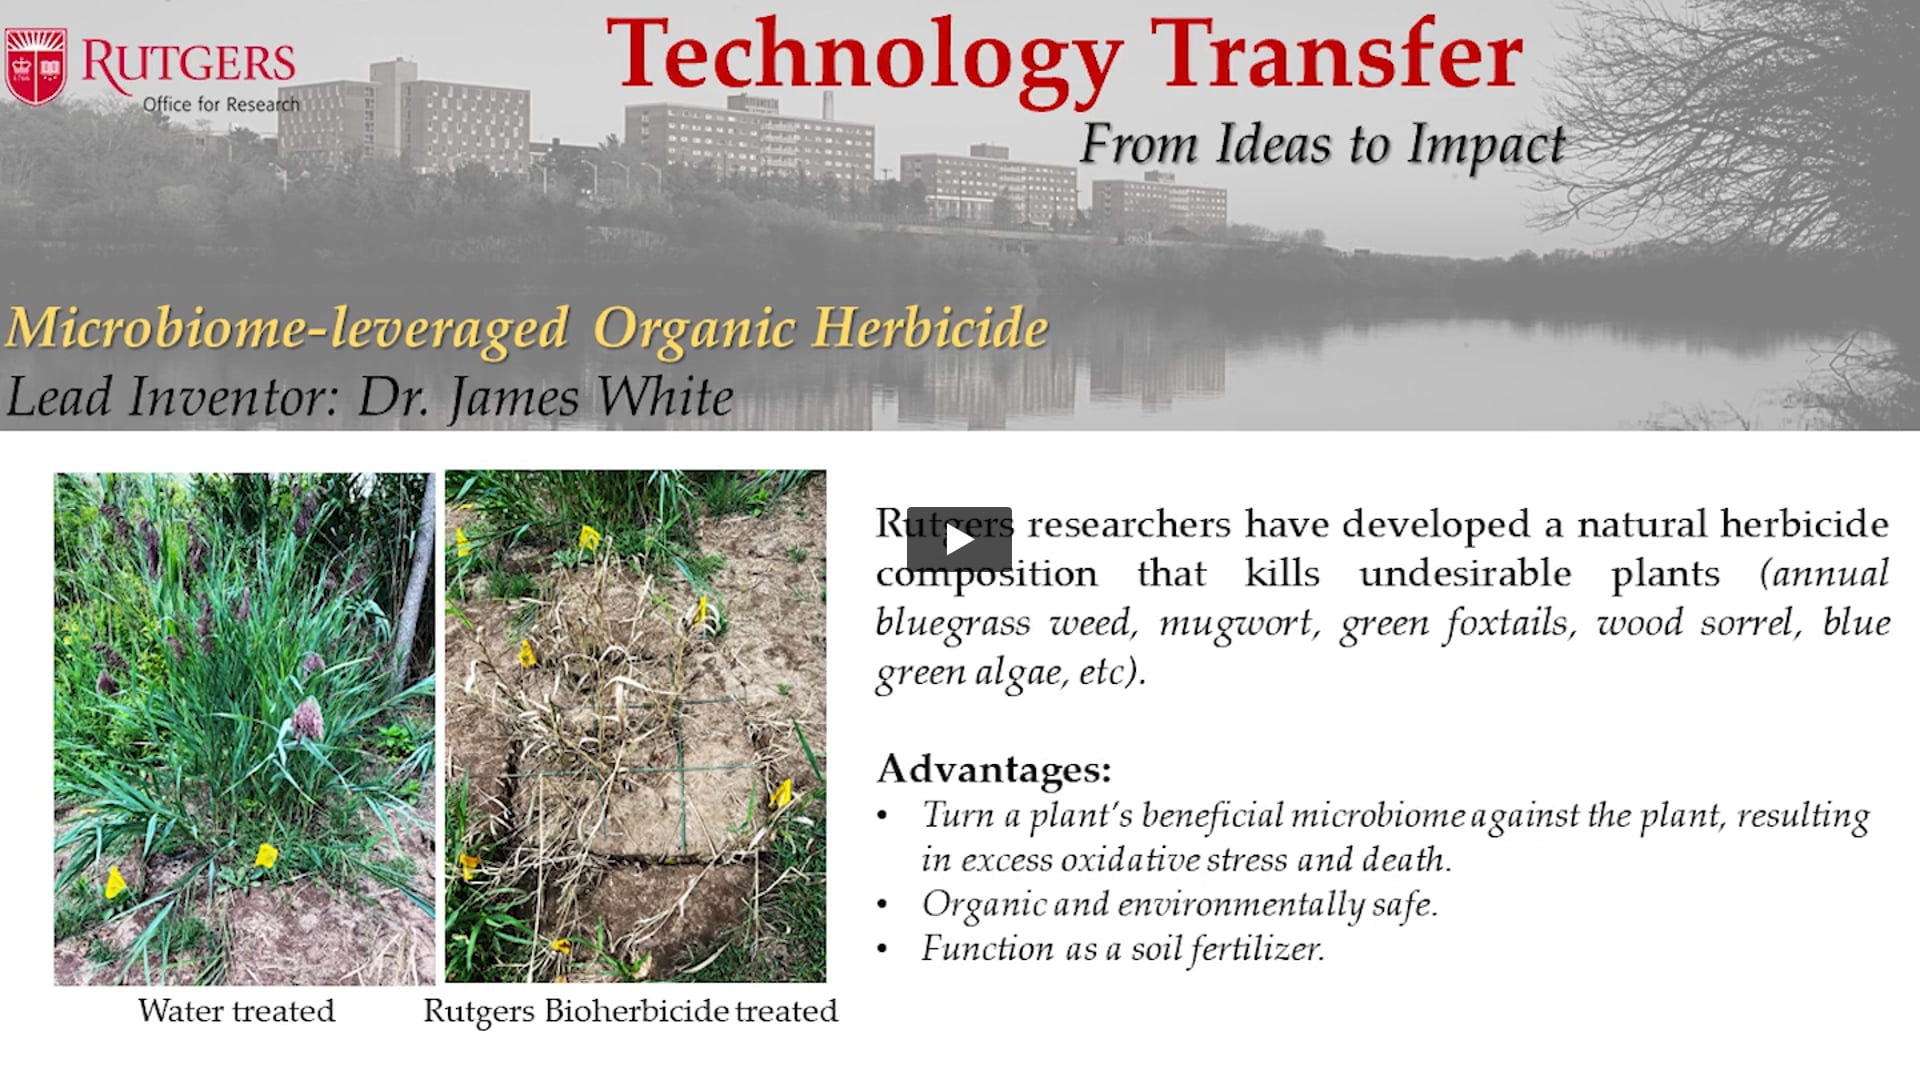 Video of James White discussing Microbiome-Leveraged Organic Herbicide